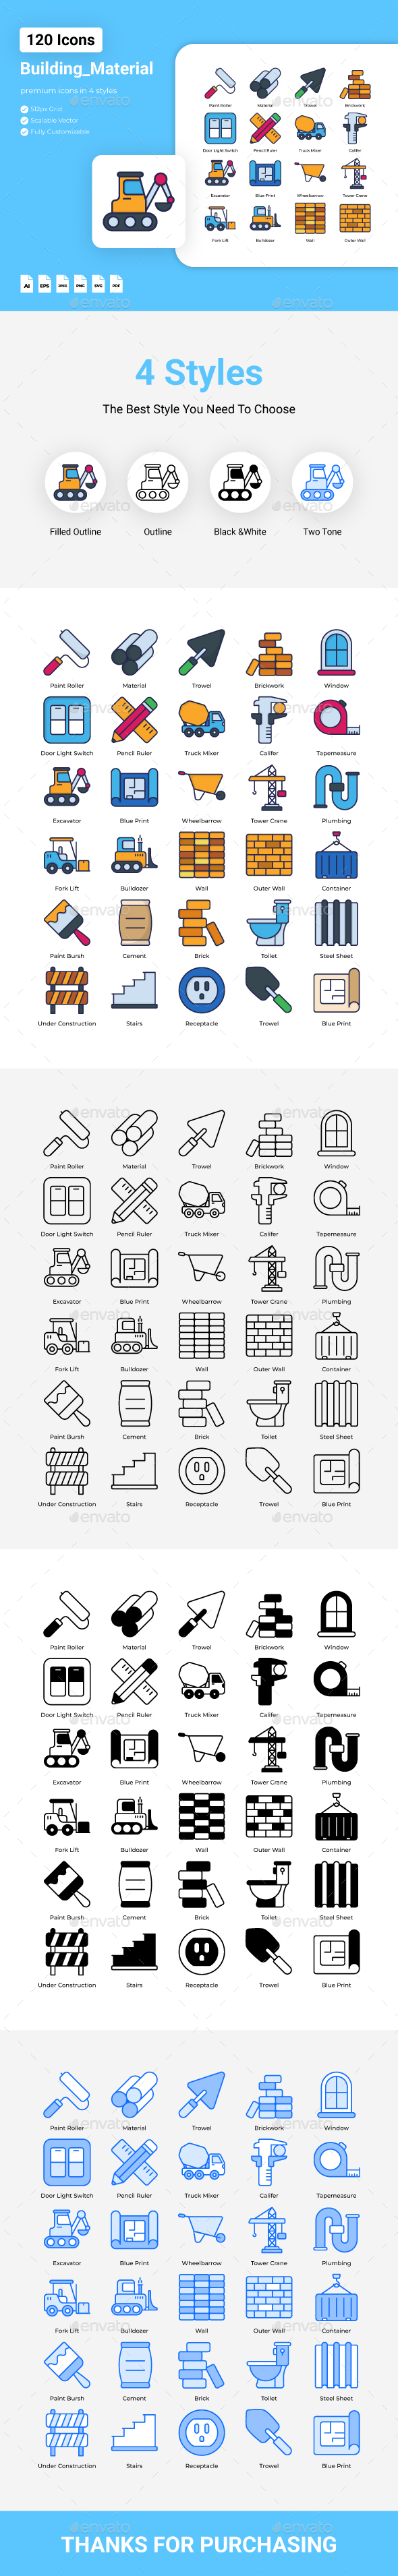 [DOWNLOAD]Building Material Icon